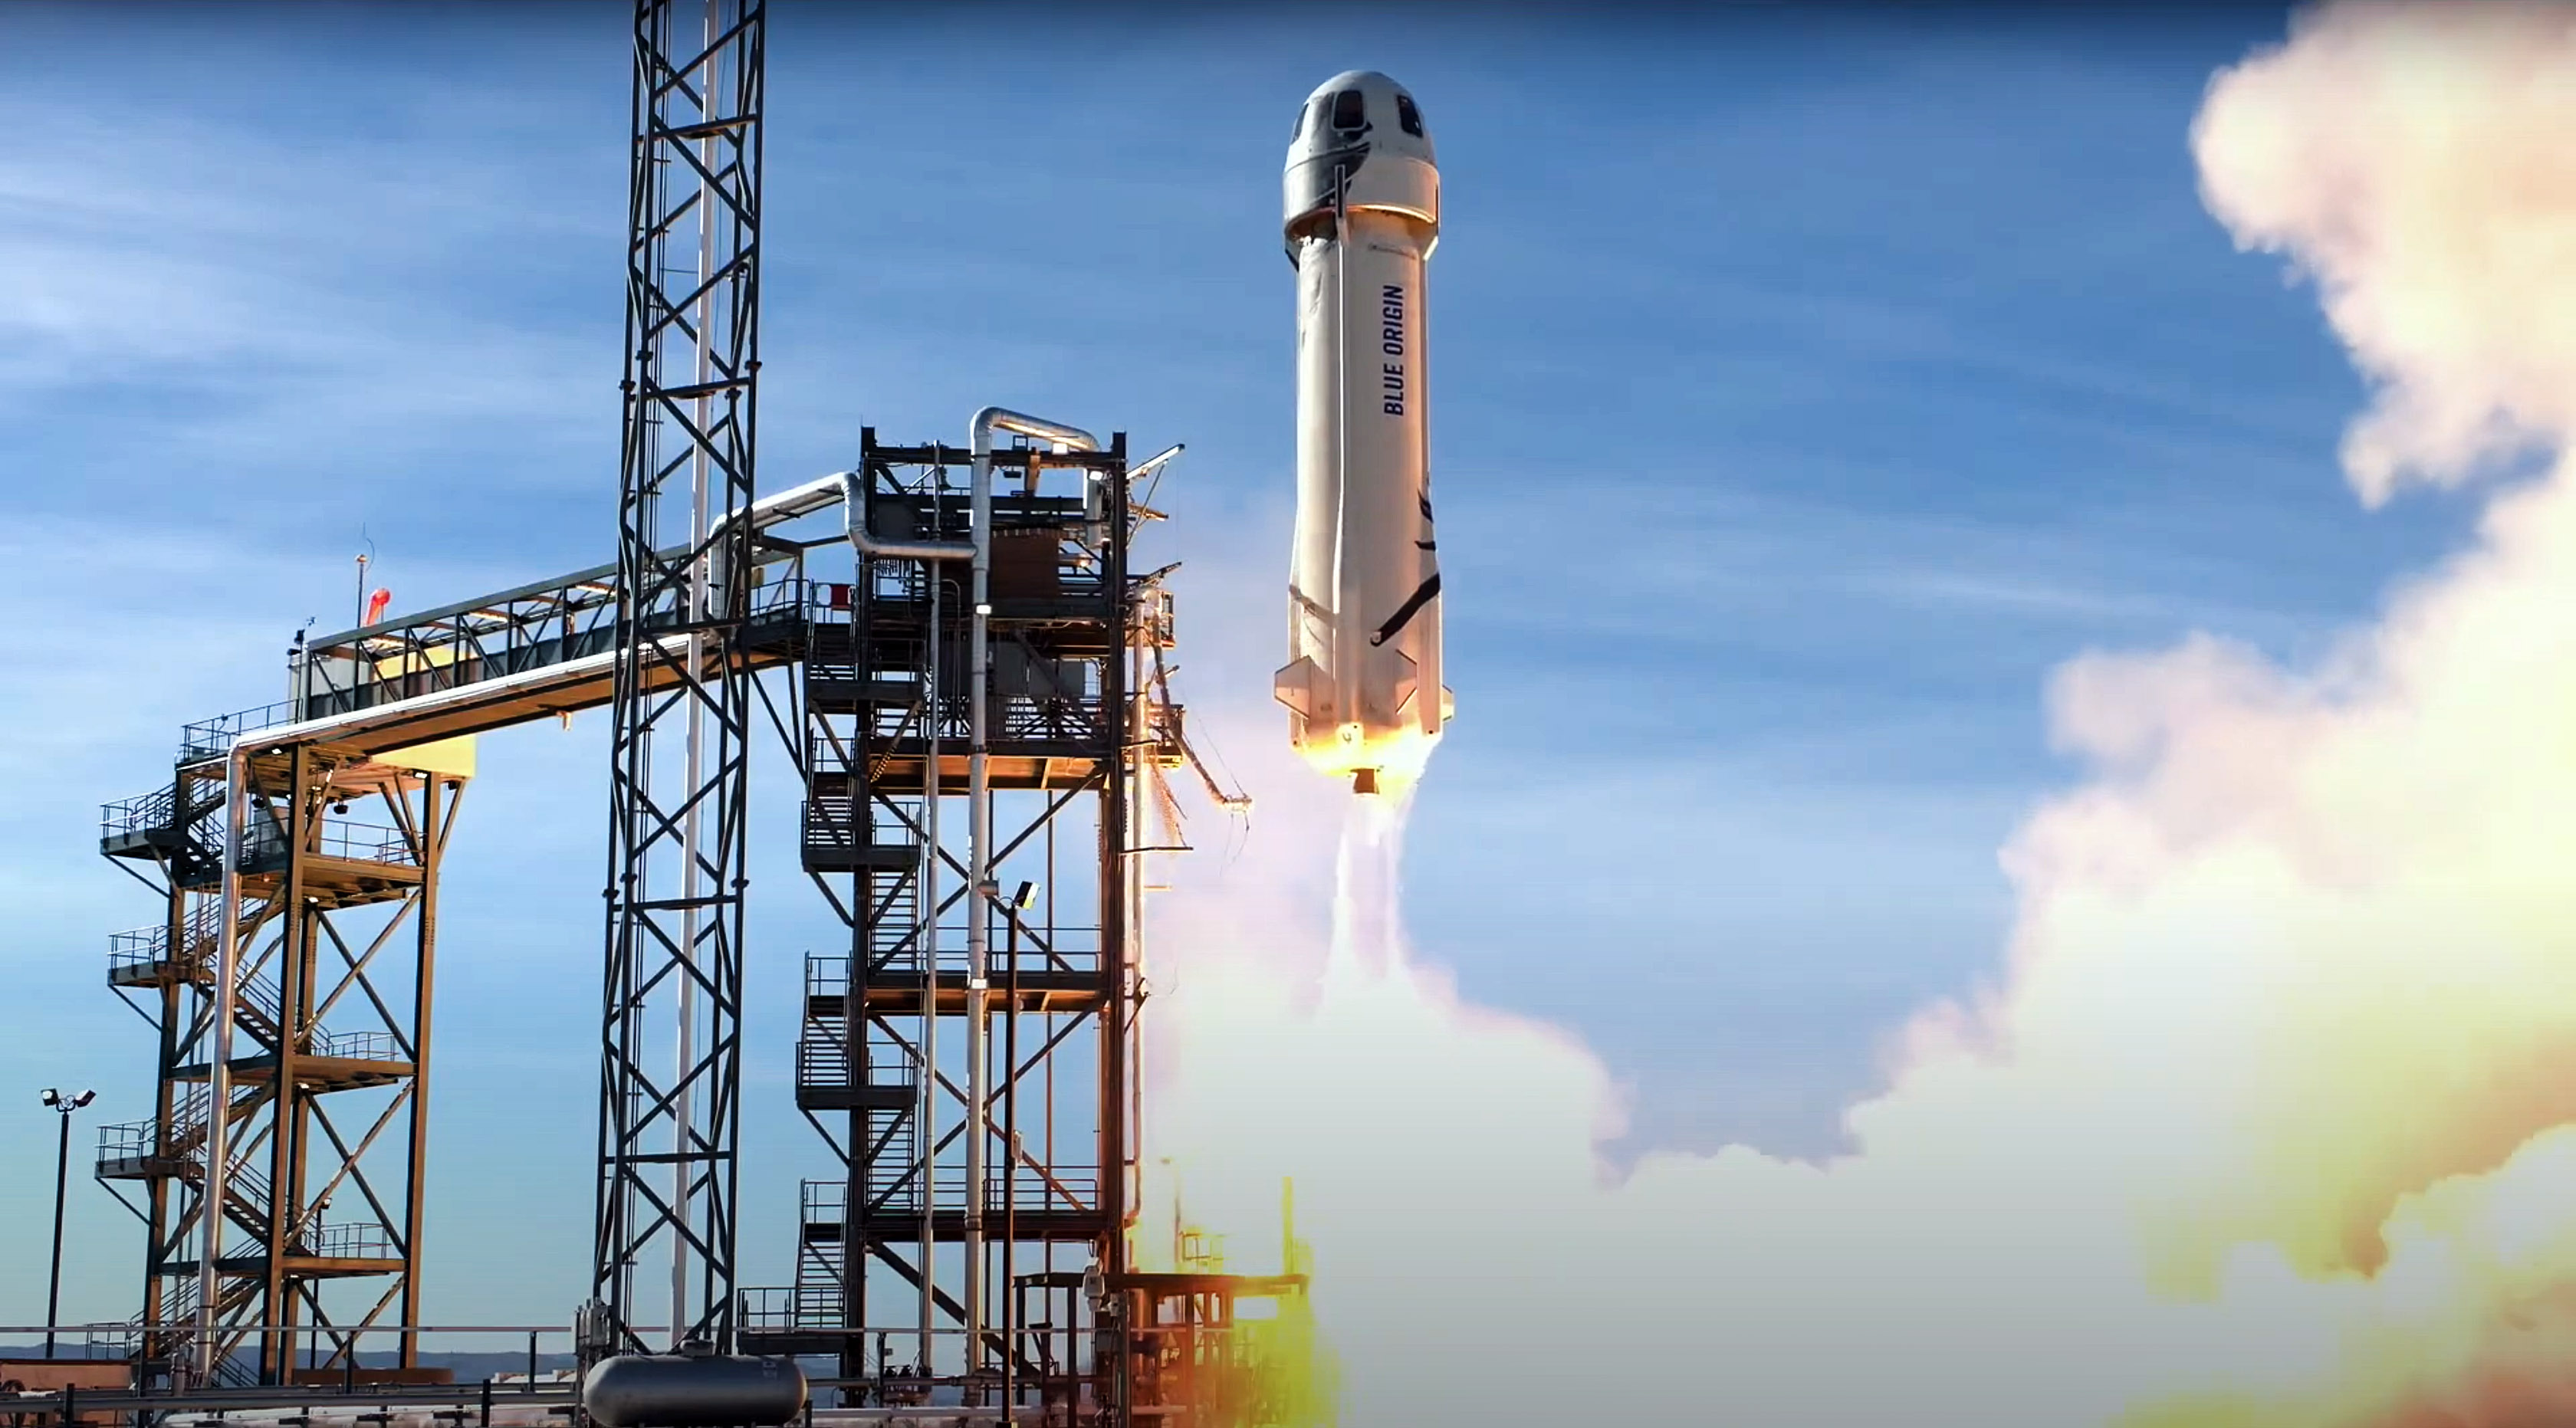 The mystery flier on Jeff Bezos' West Texas rocket launch is an 18-year-old